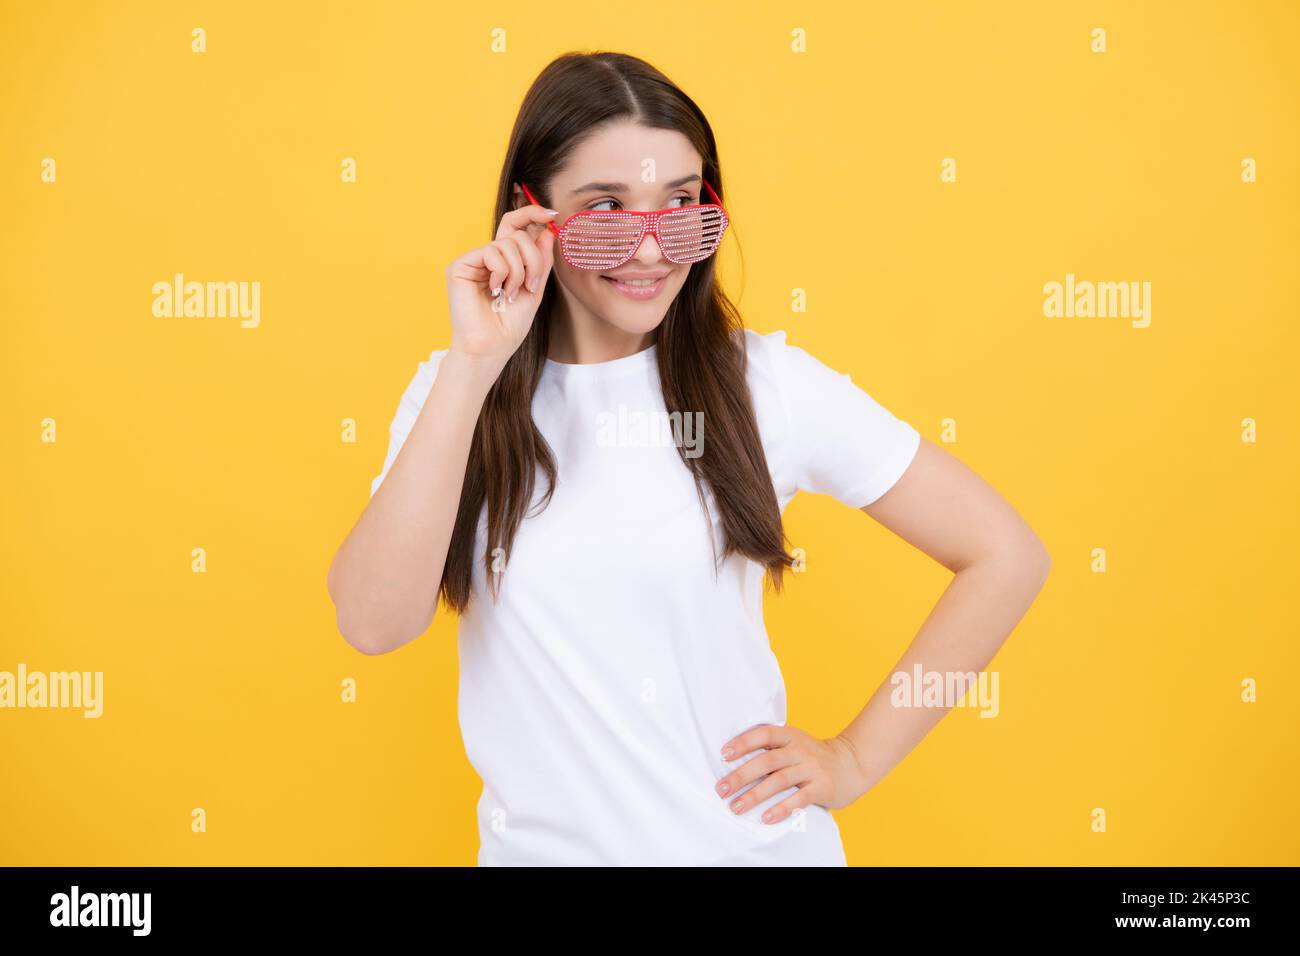 Surprised woman, shocking girl wearing funny glasses on isolated yellow background, Wow face feelings with copy space for advertising. Stock Photo